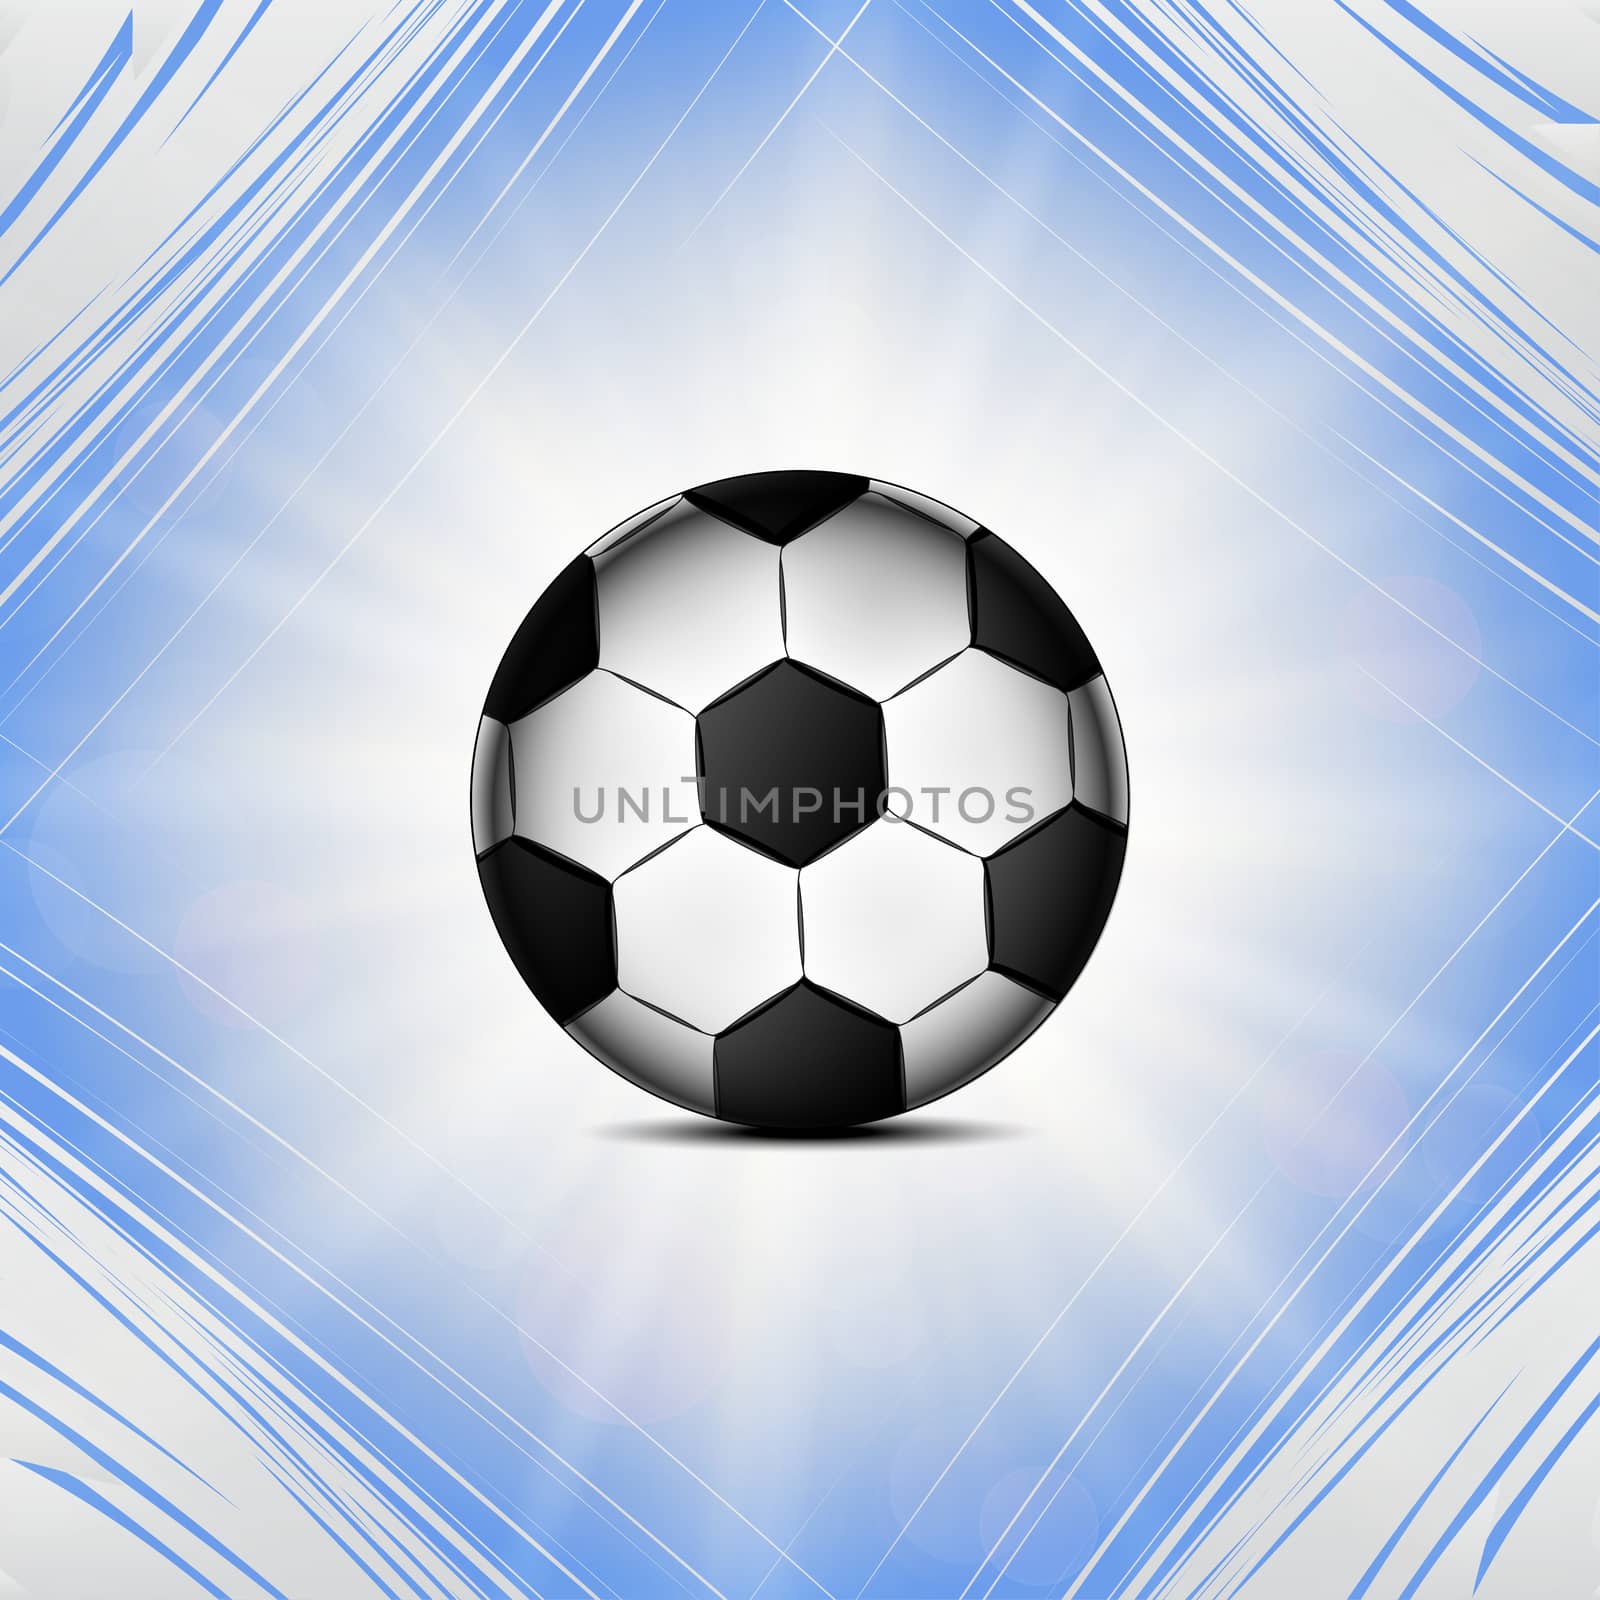 Soccer ball icon on a flat geometric abstract background   illustration. 